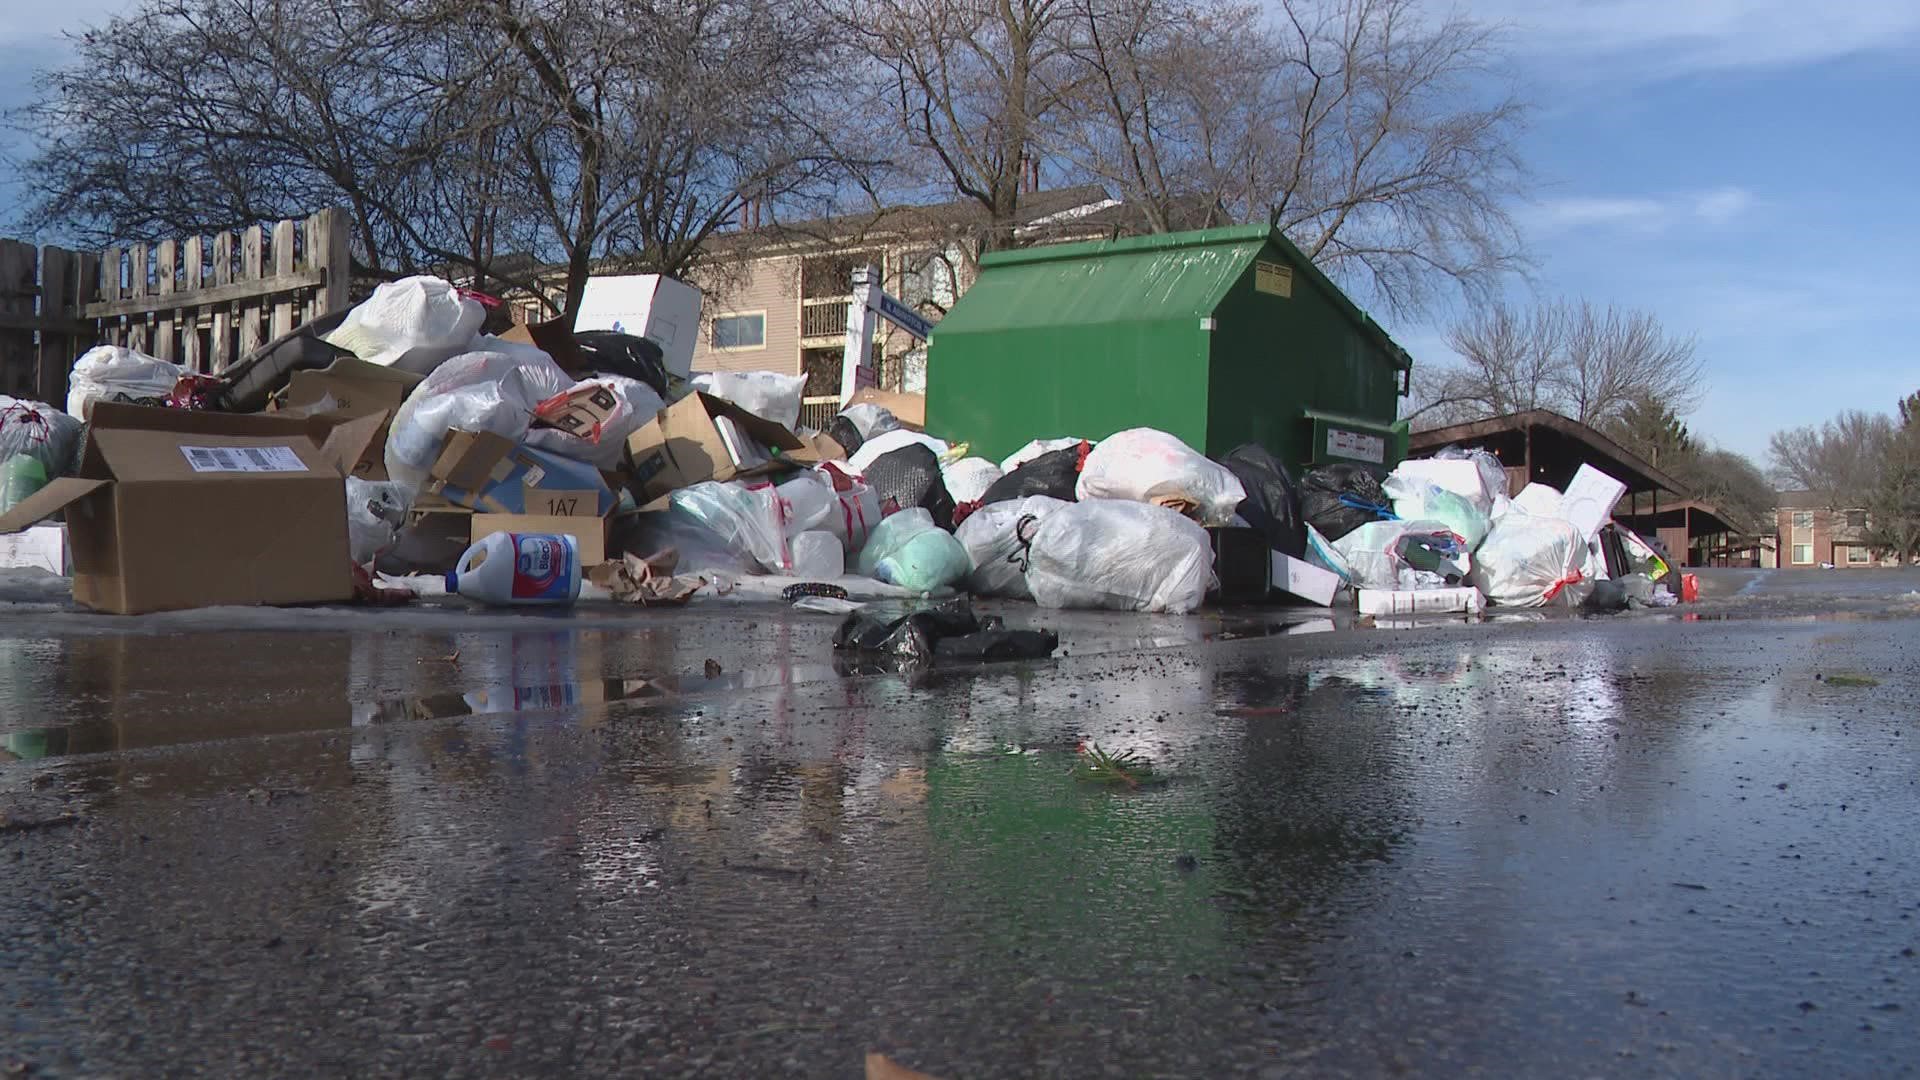 One resident said it's at least two week's worth of uncollected trash.